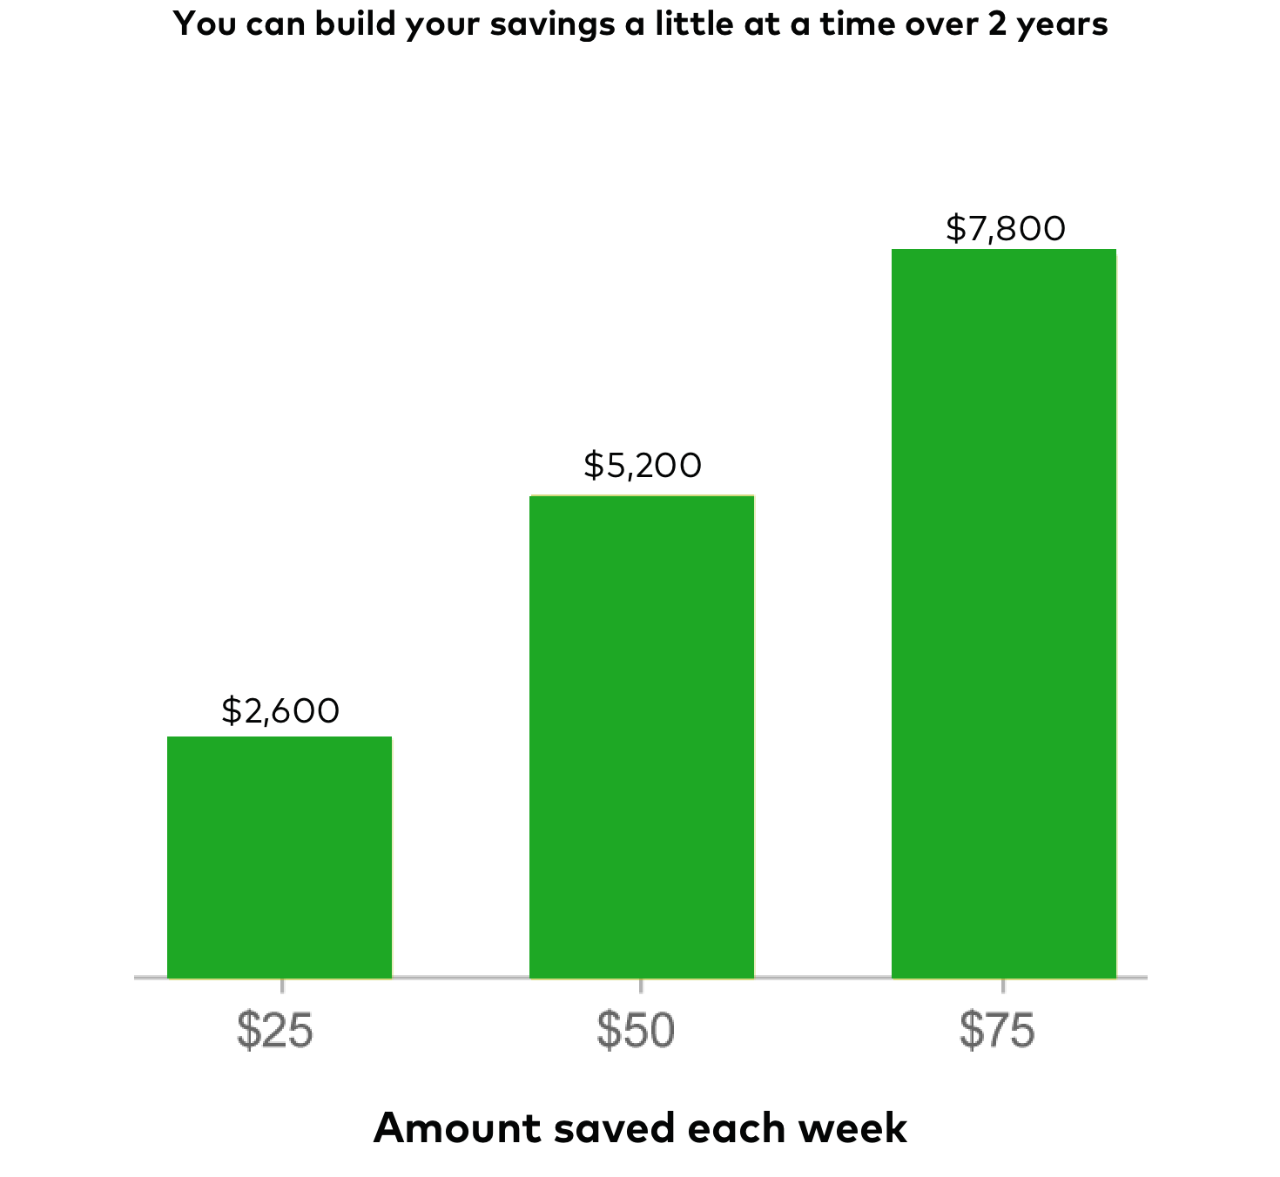 Chart showing saving $25 a week in an emergency fund could grow to $2,600 in 2 years; $50 a week to $5,200; and $75 a week to $7,800.